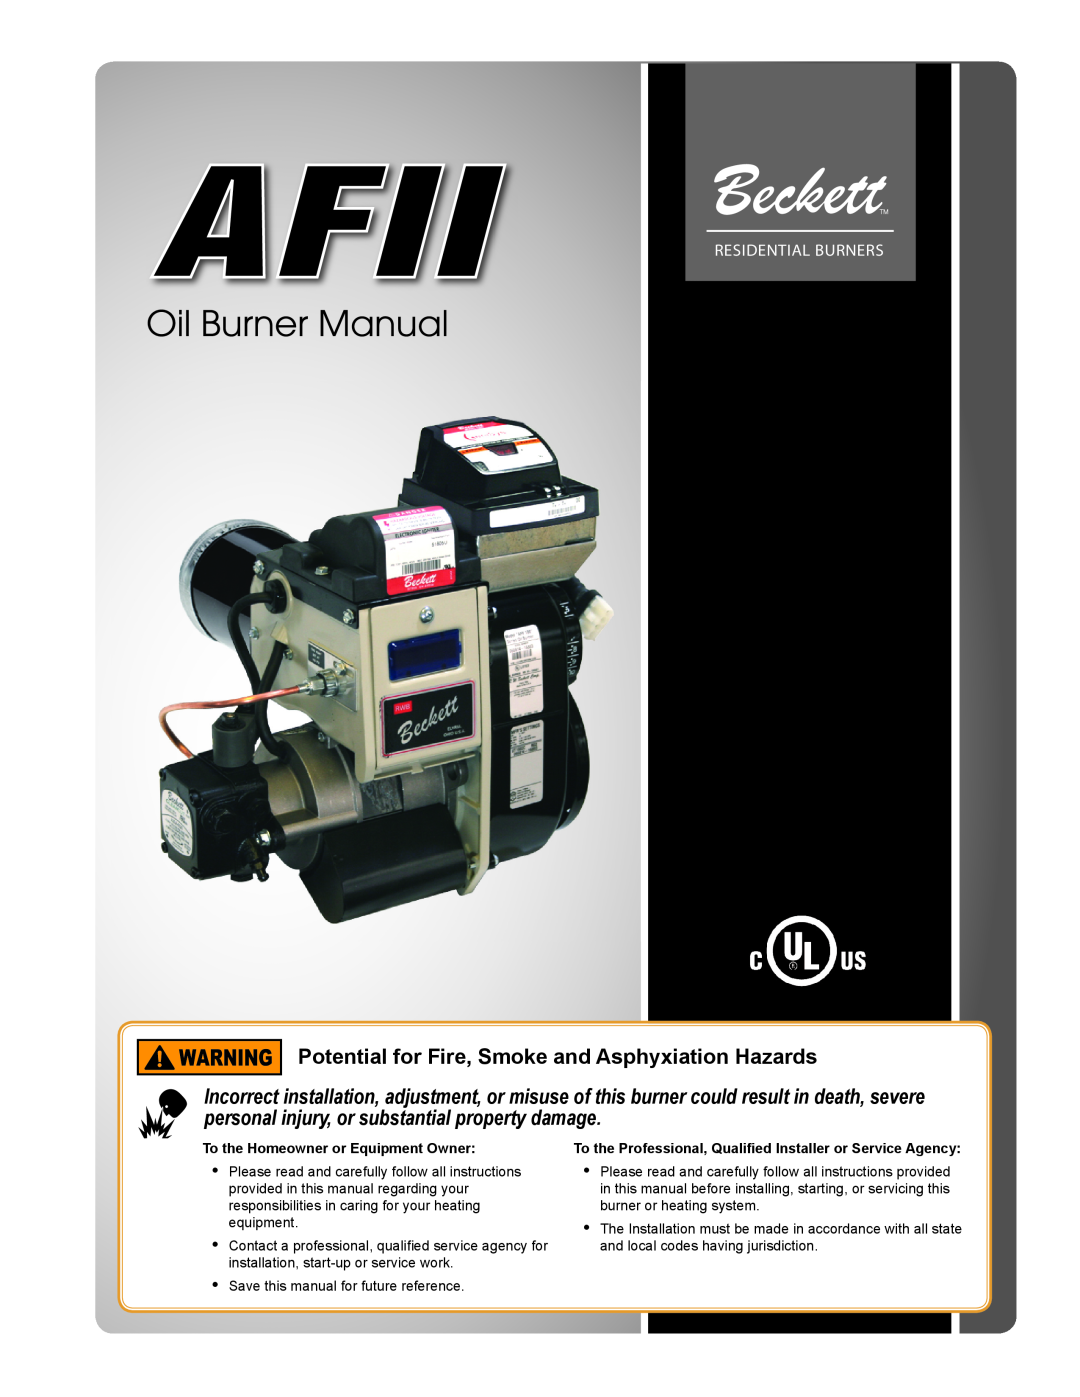 Beckett AFII manual Potential for Fire, Smoke and Asphyxiation Hazards, Residential Burners 